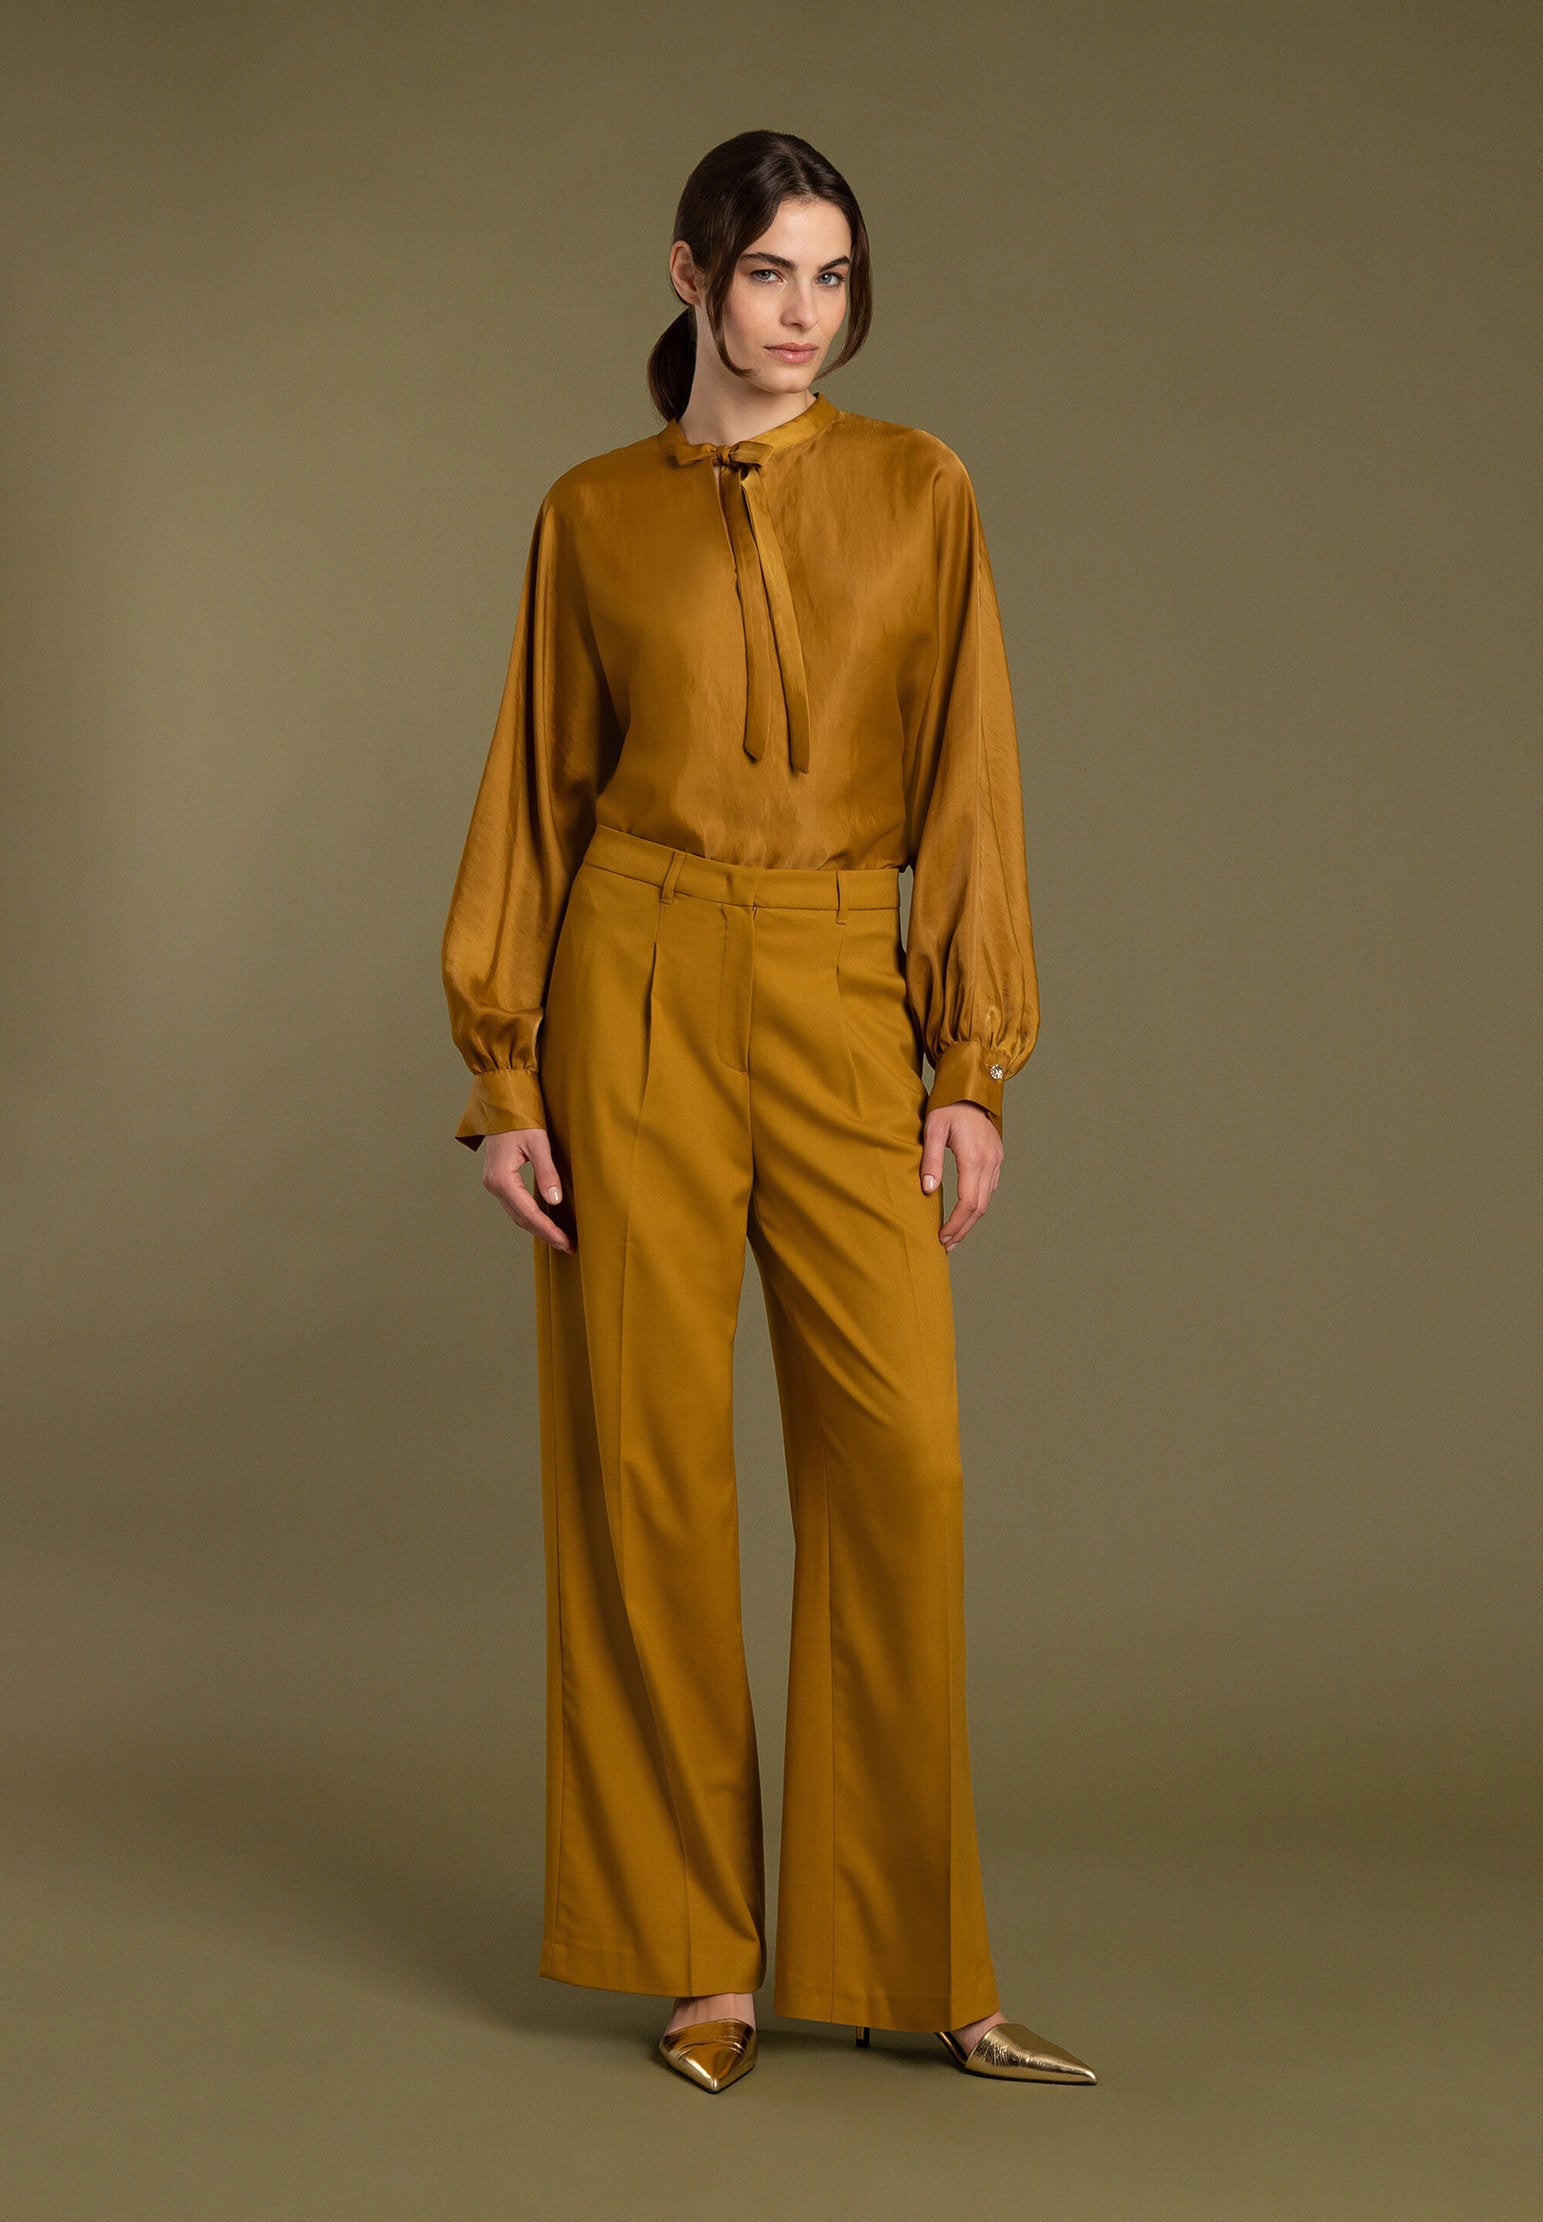 Mustard Yellow Satin Blouse With Bow_31122056_0175_01